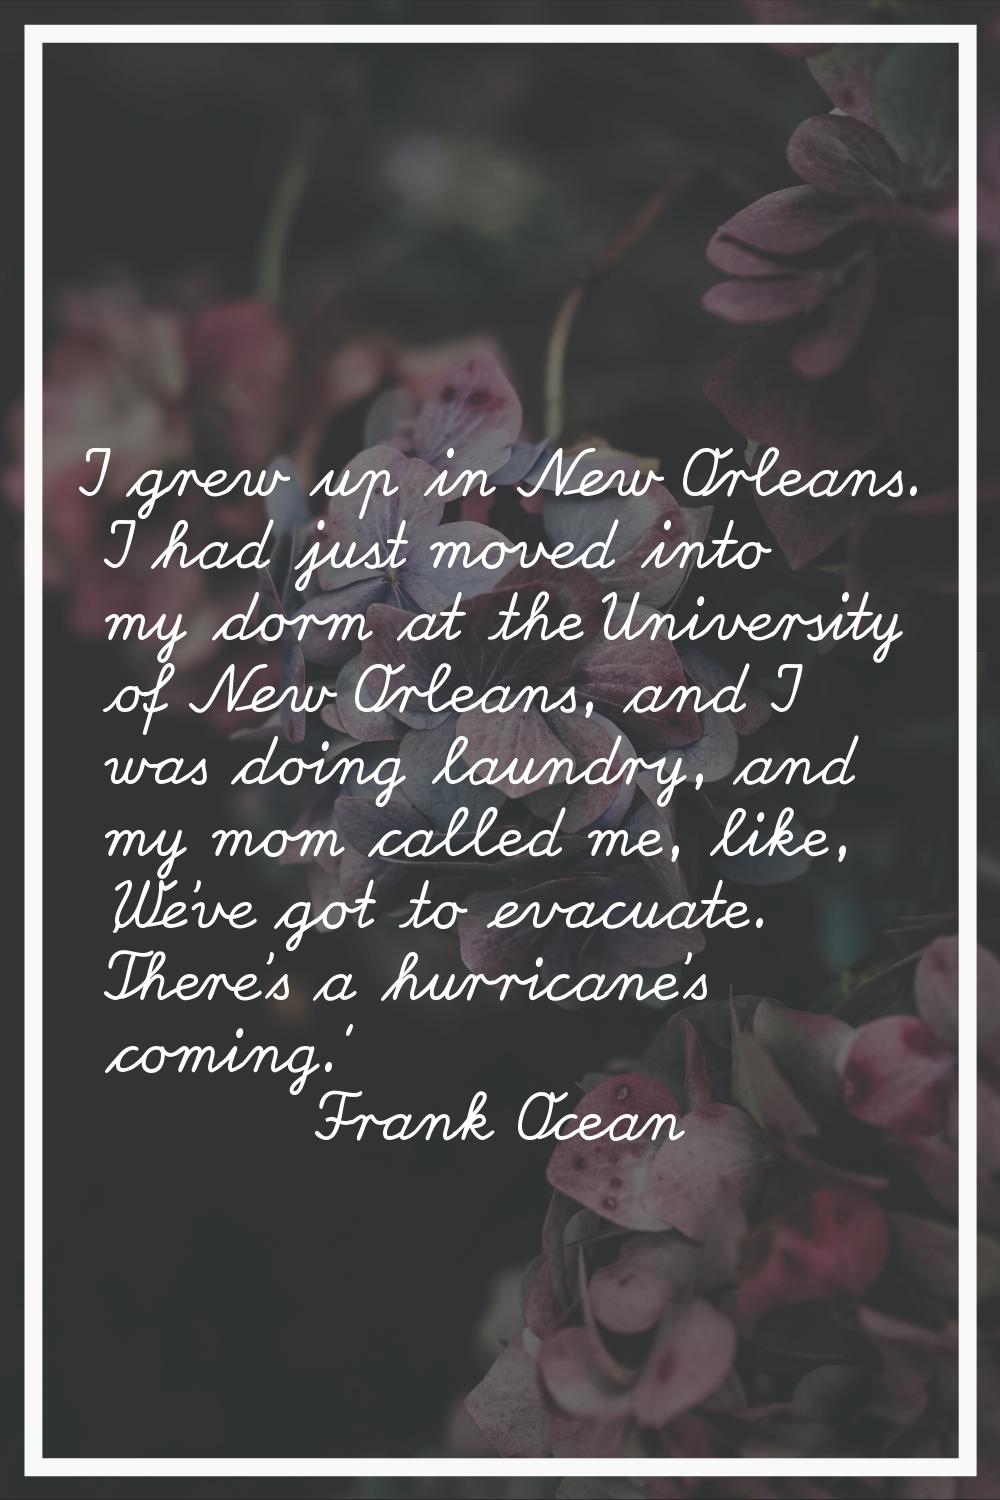 I grew up in New Orleans. I had just moved into my dorm at the University of New Orleans, and I was